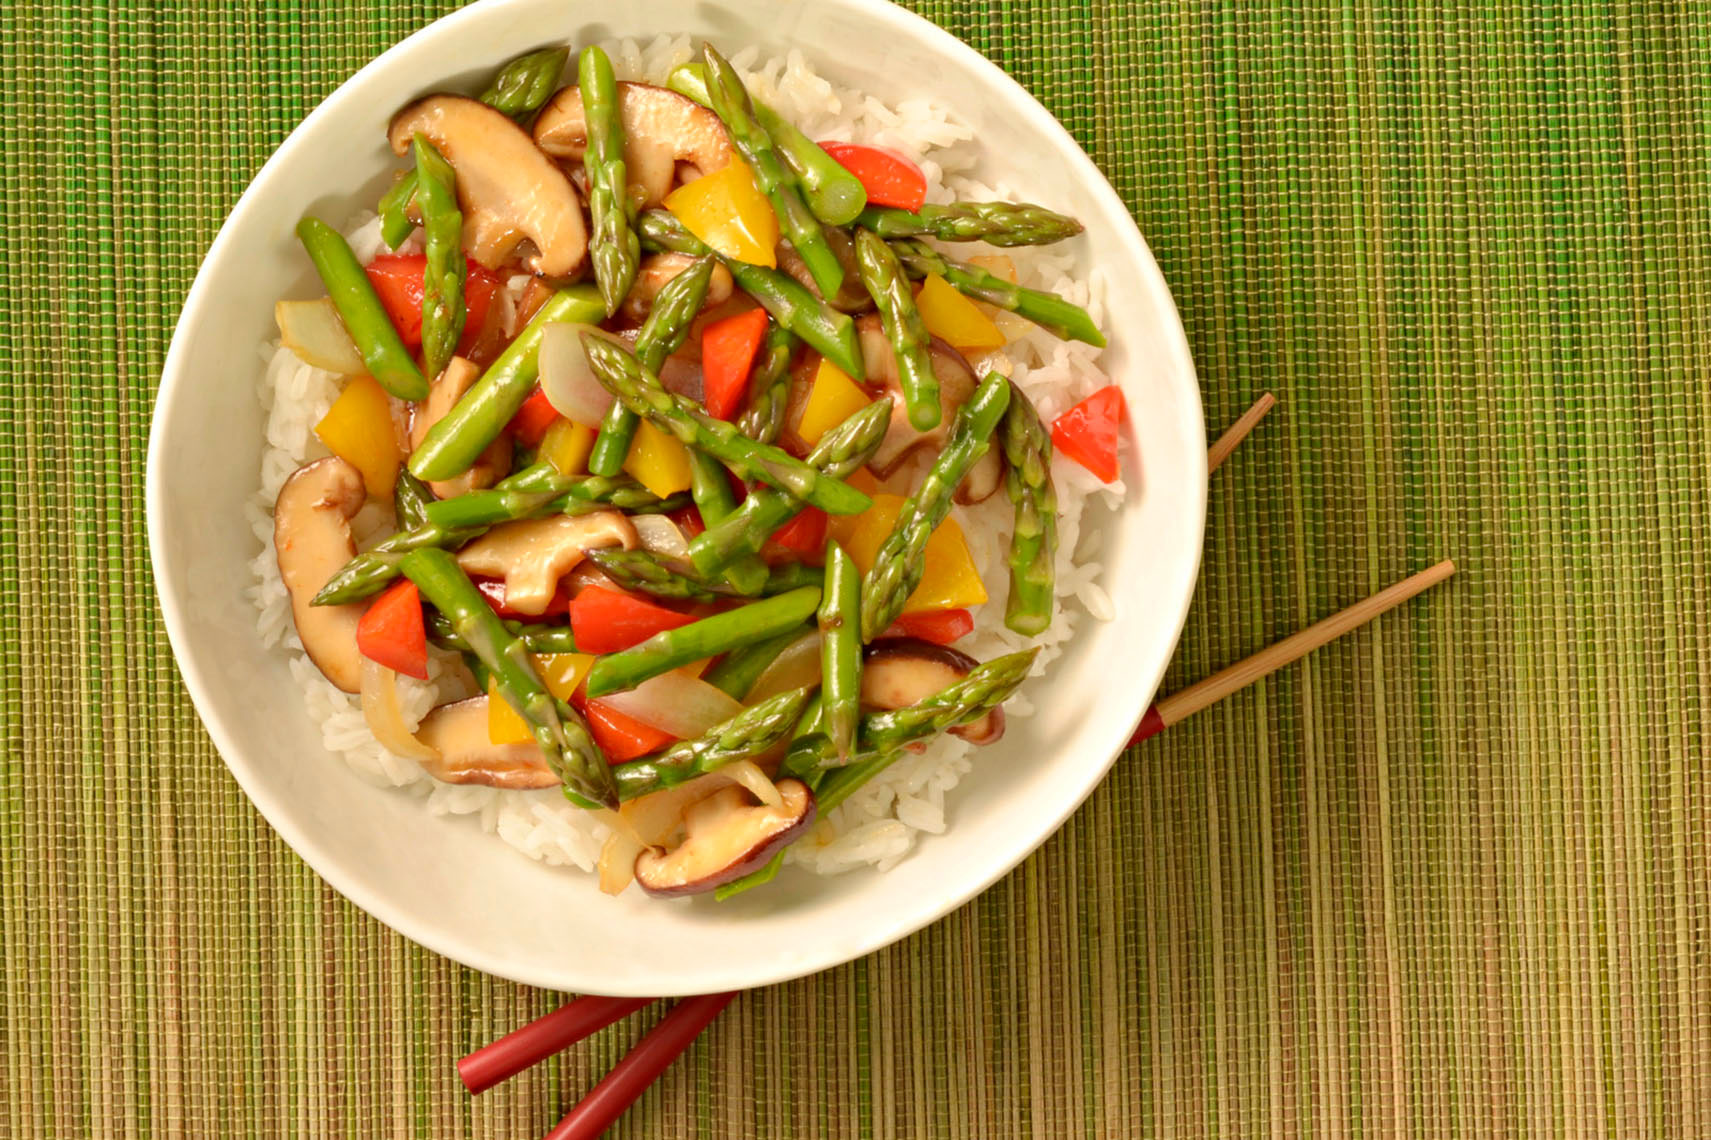 Asparagus-stirfry-with-mushrooms-and-red-pepper-on-white-rice-by-top-Los-Angeles-food-photographer.